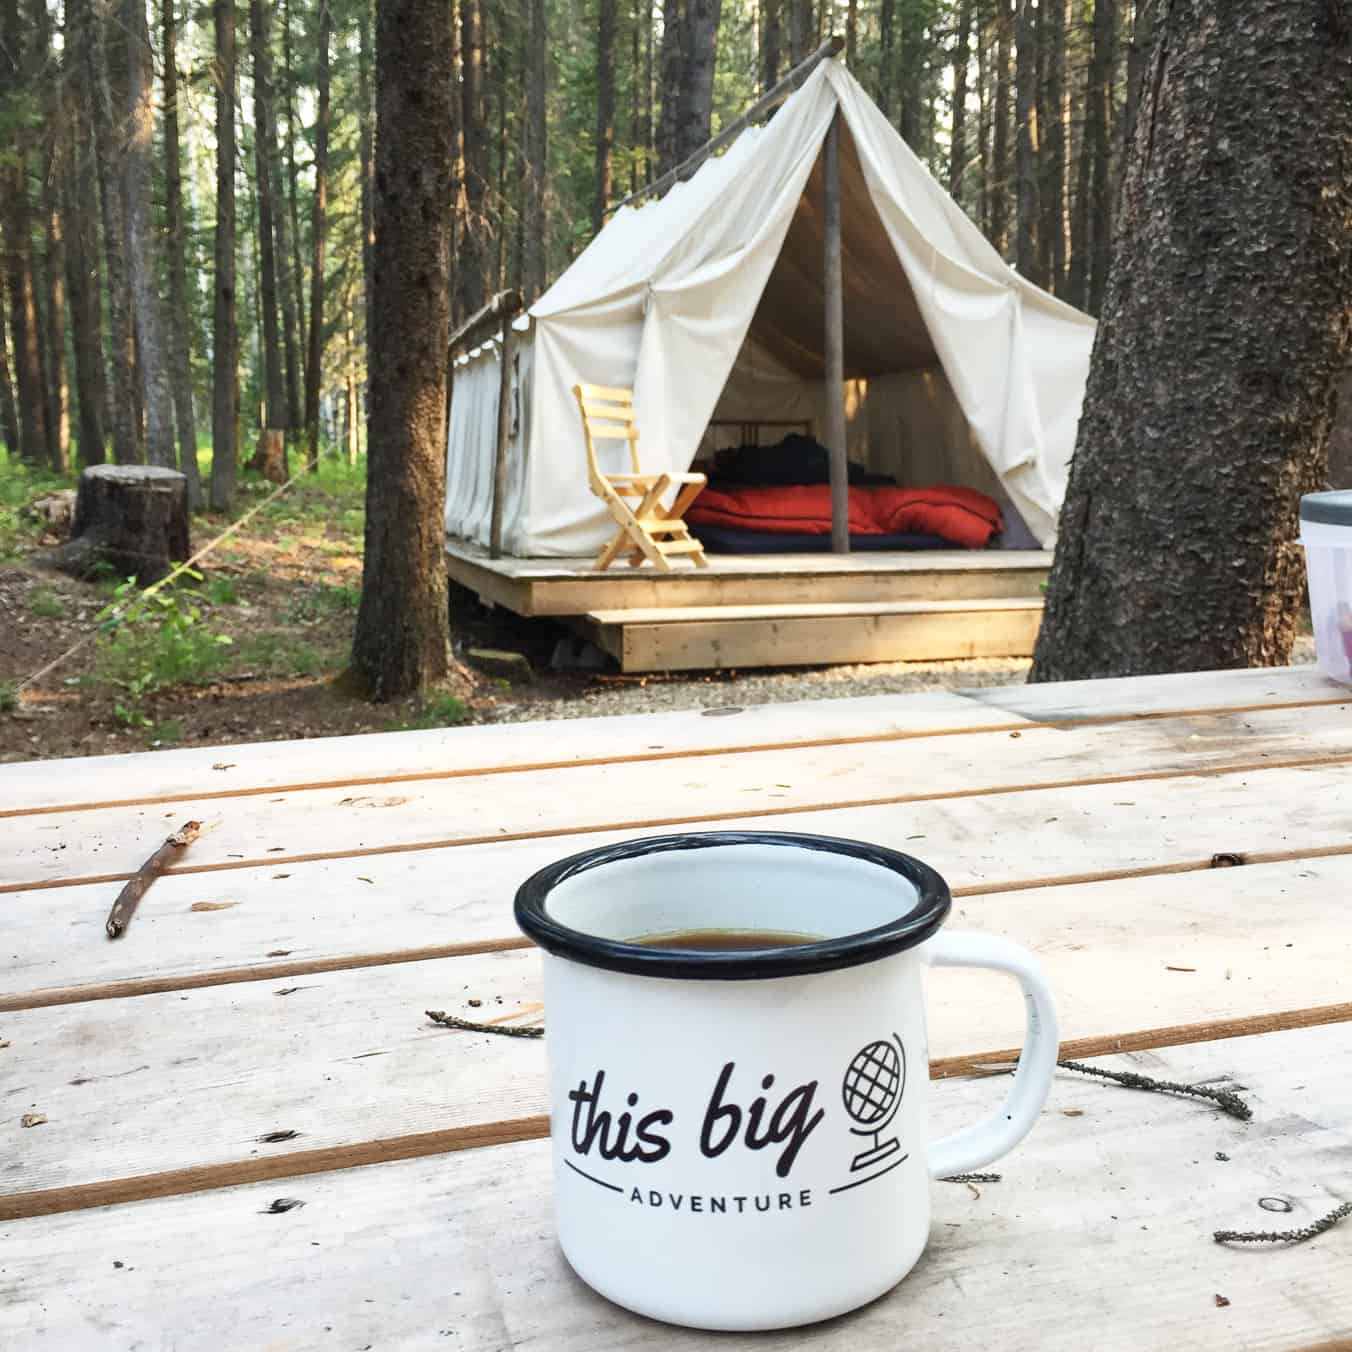 Tips for Staying in a Trapper's Tent